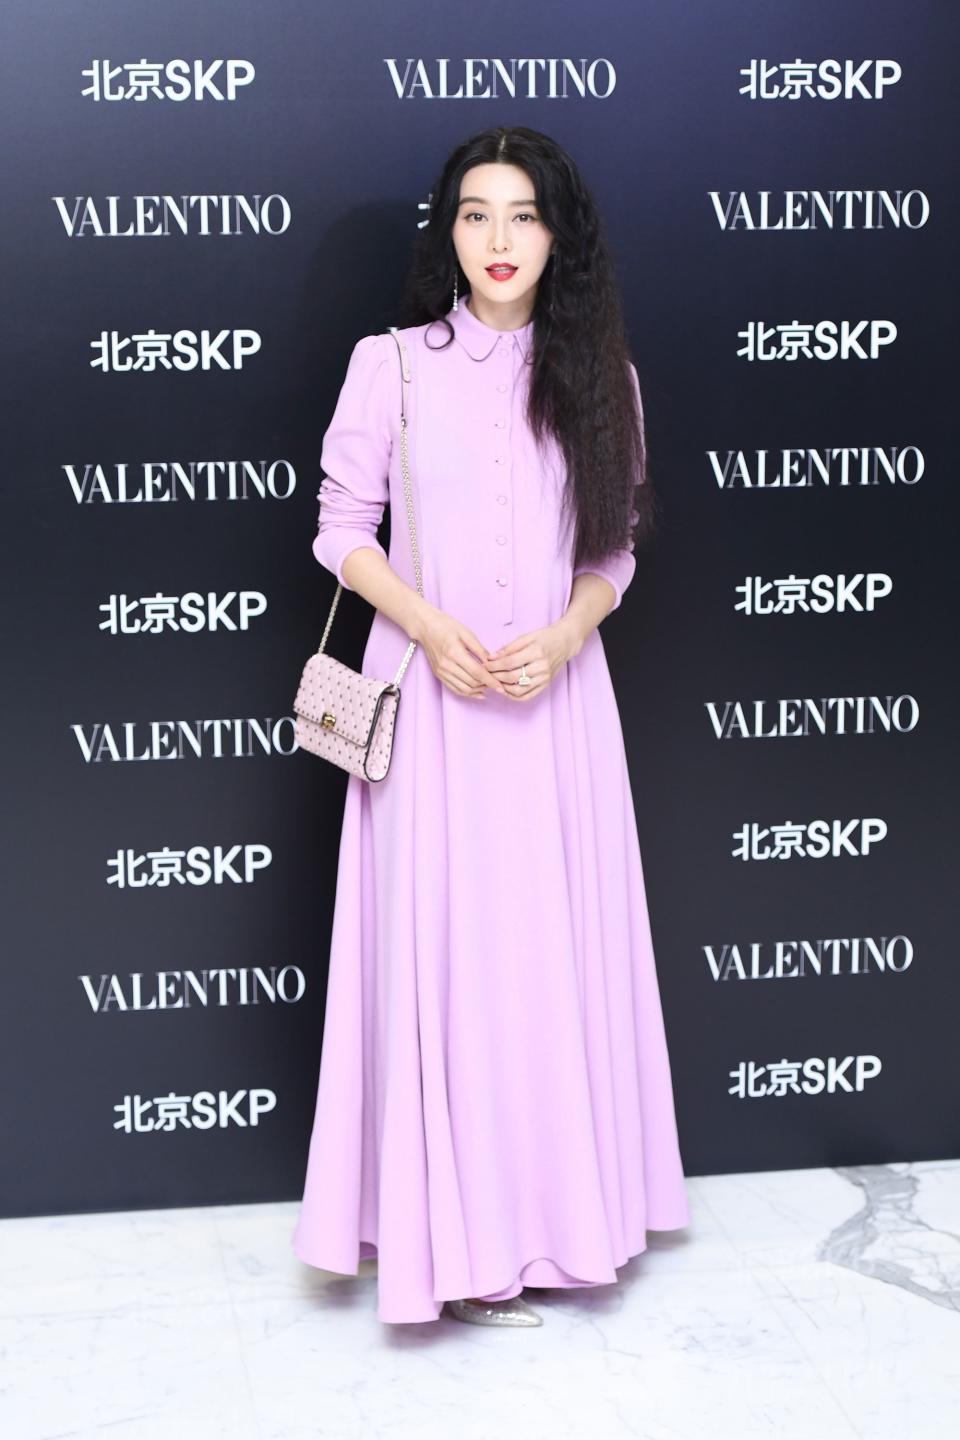 WHO: Fan Bingbing WHAT: Valentino WHERE: At a Valentino fan event, Beijing, China WHEN: August 9, 2017